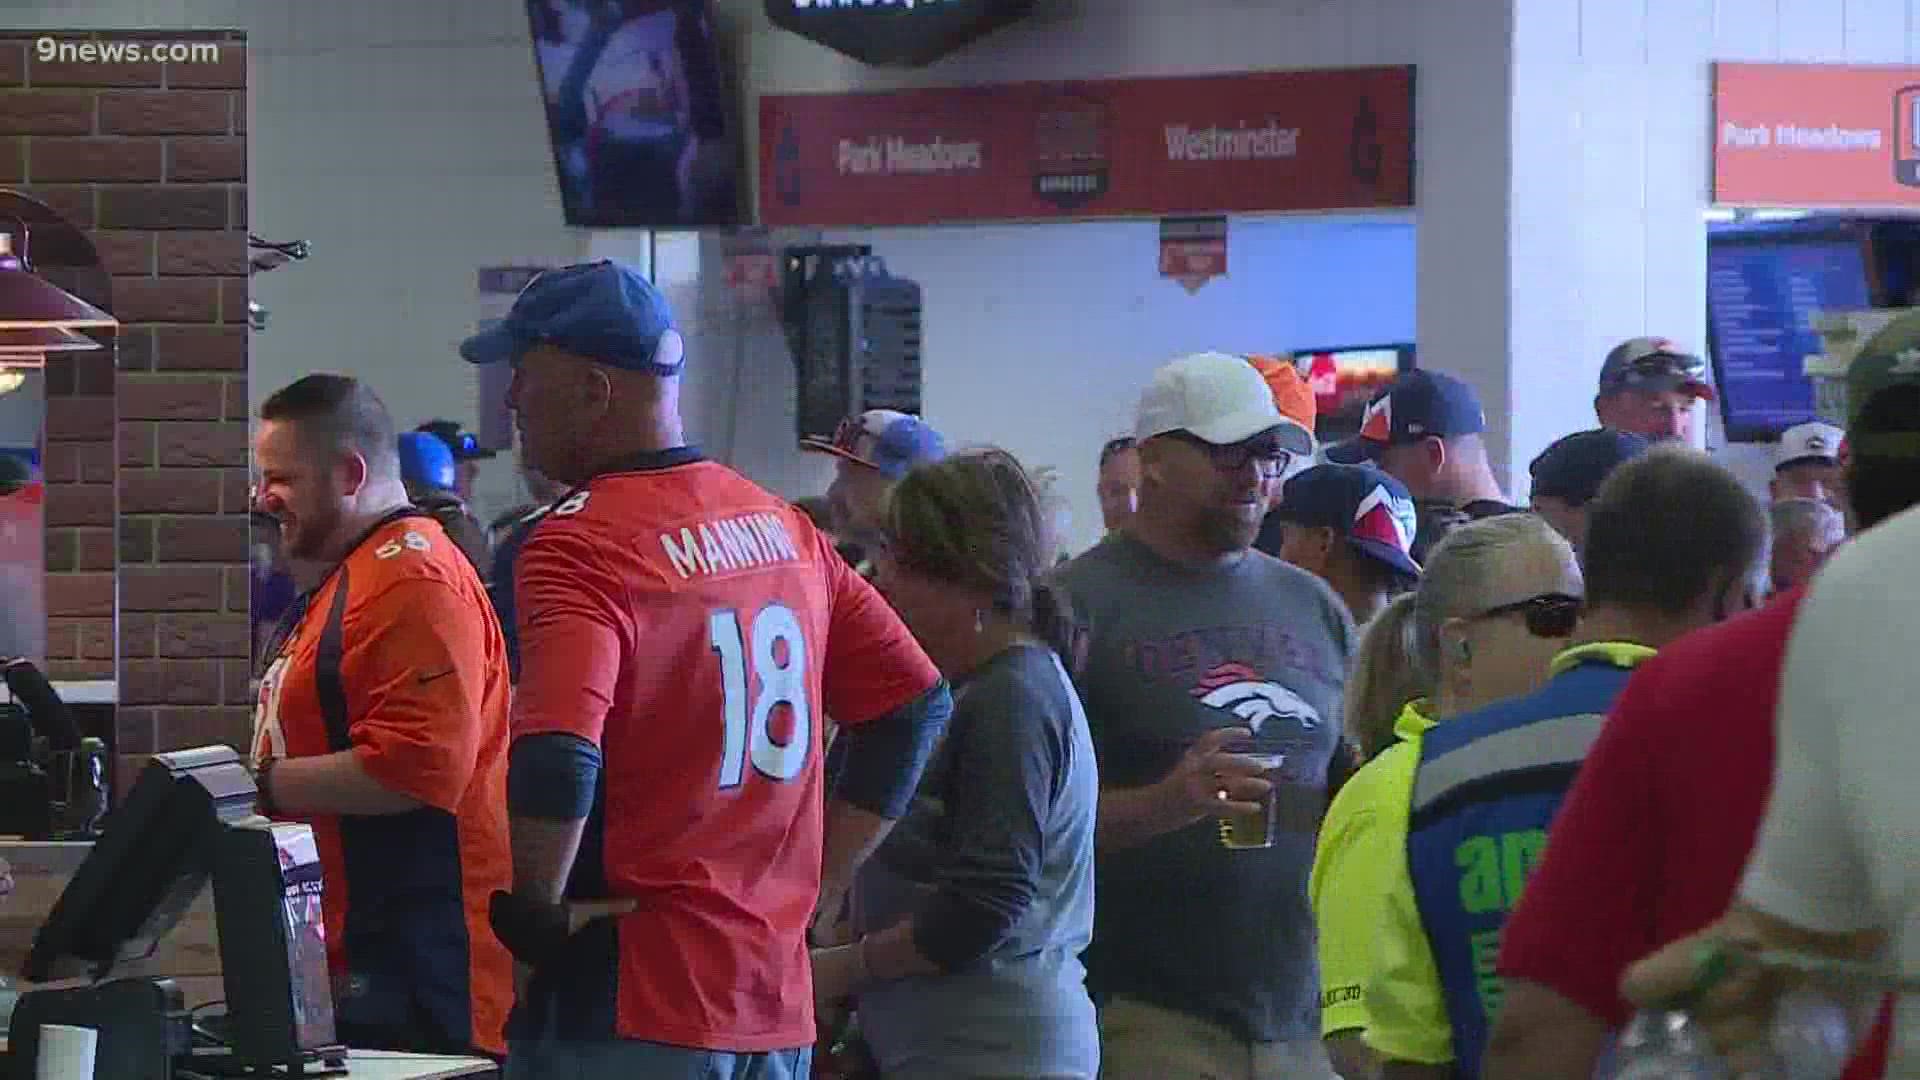 As crowds return to Empower Field at Mile High, they may bump into slower-than-normal service as the stadium, like many businesses, deals with a labor shortage.